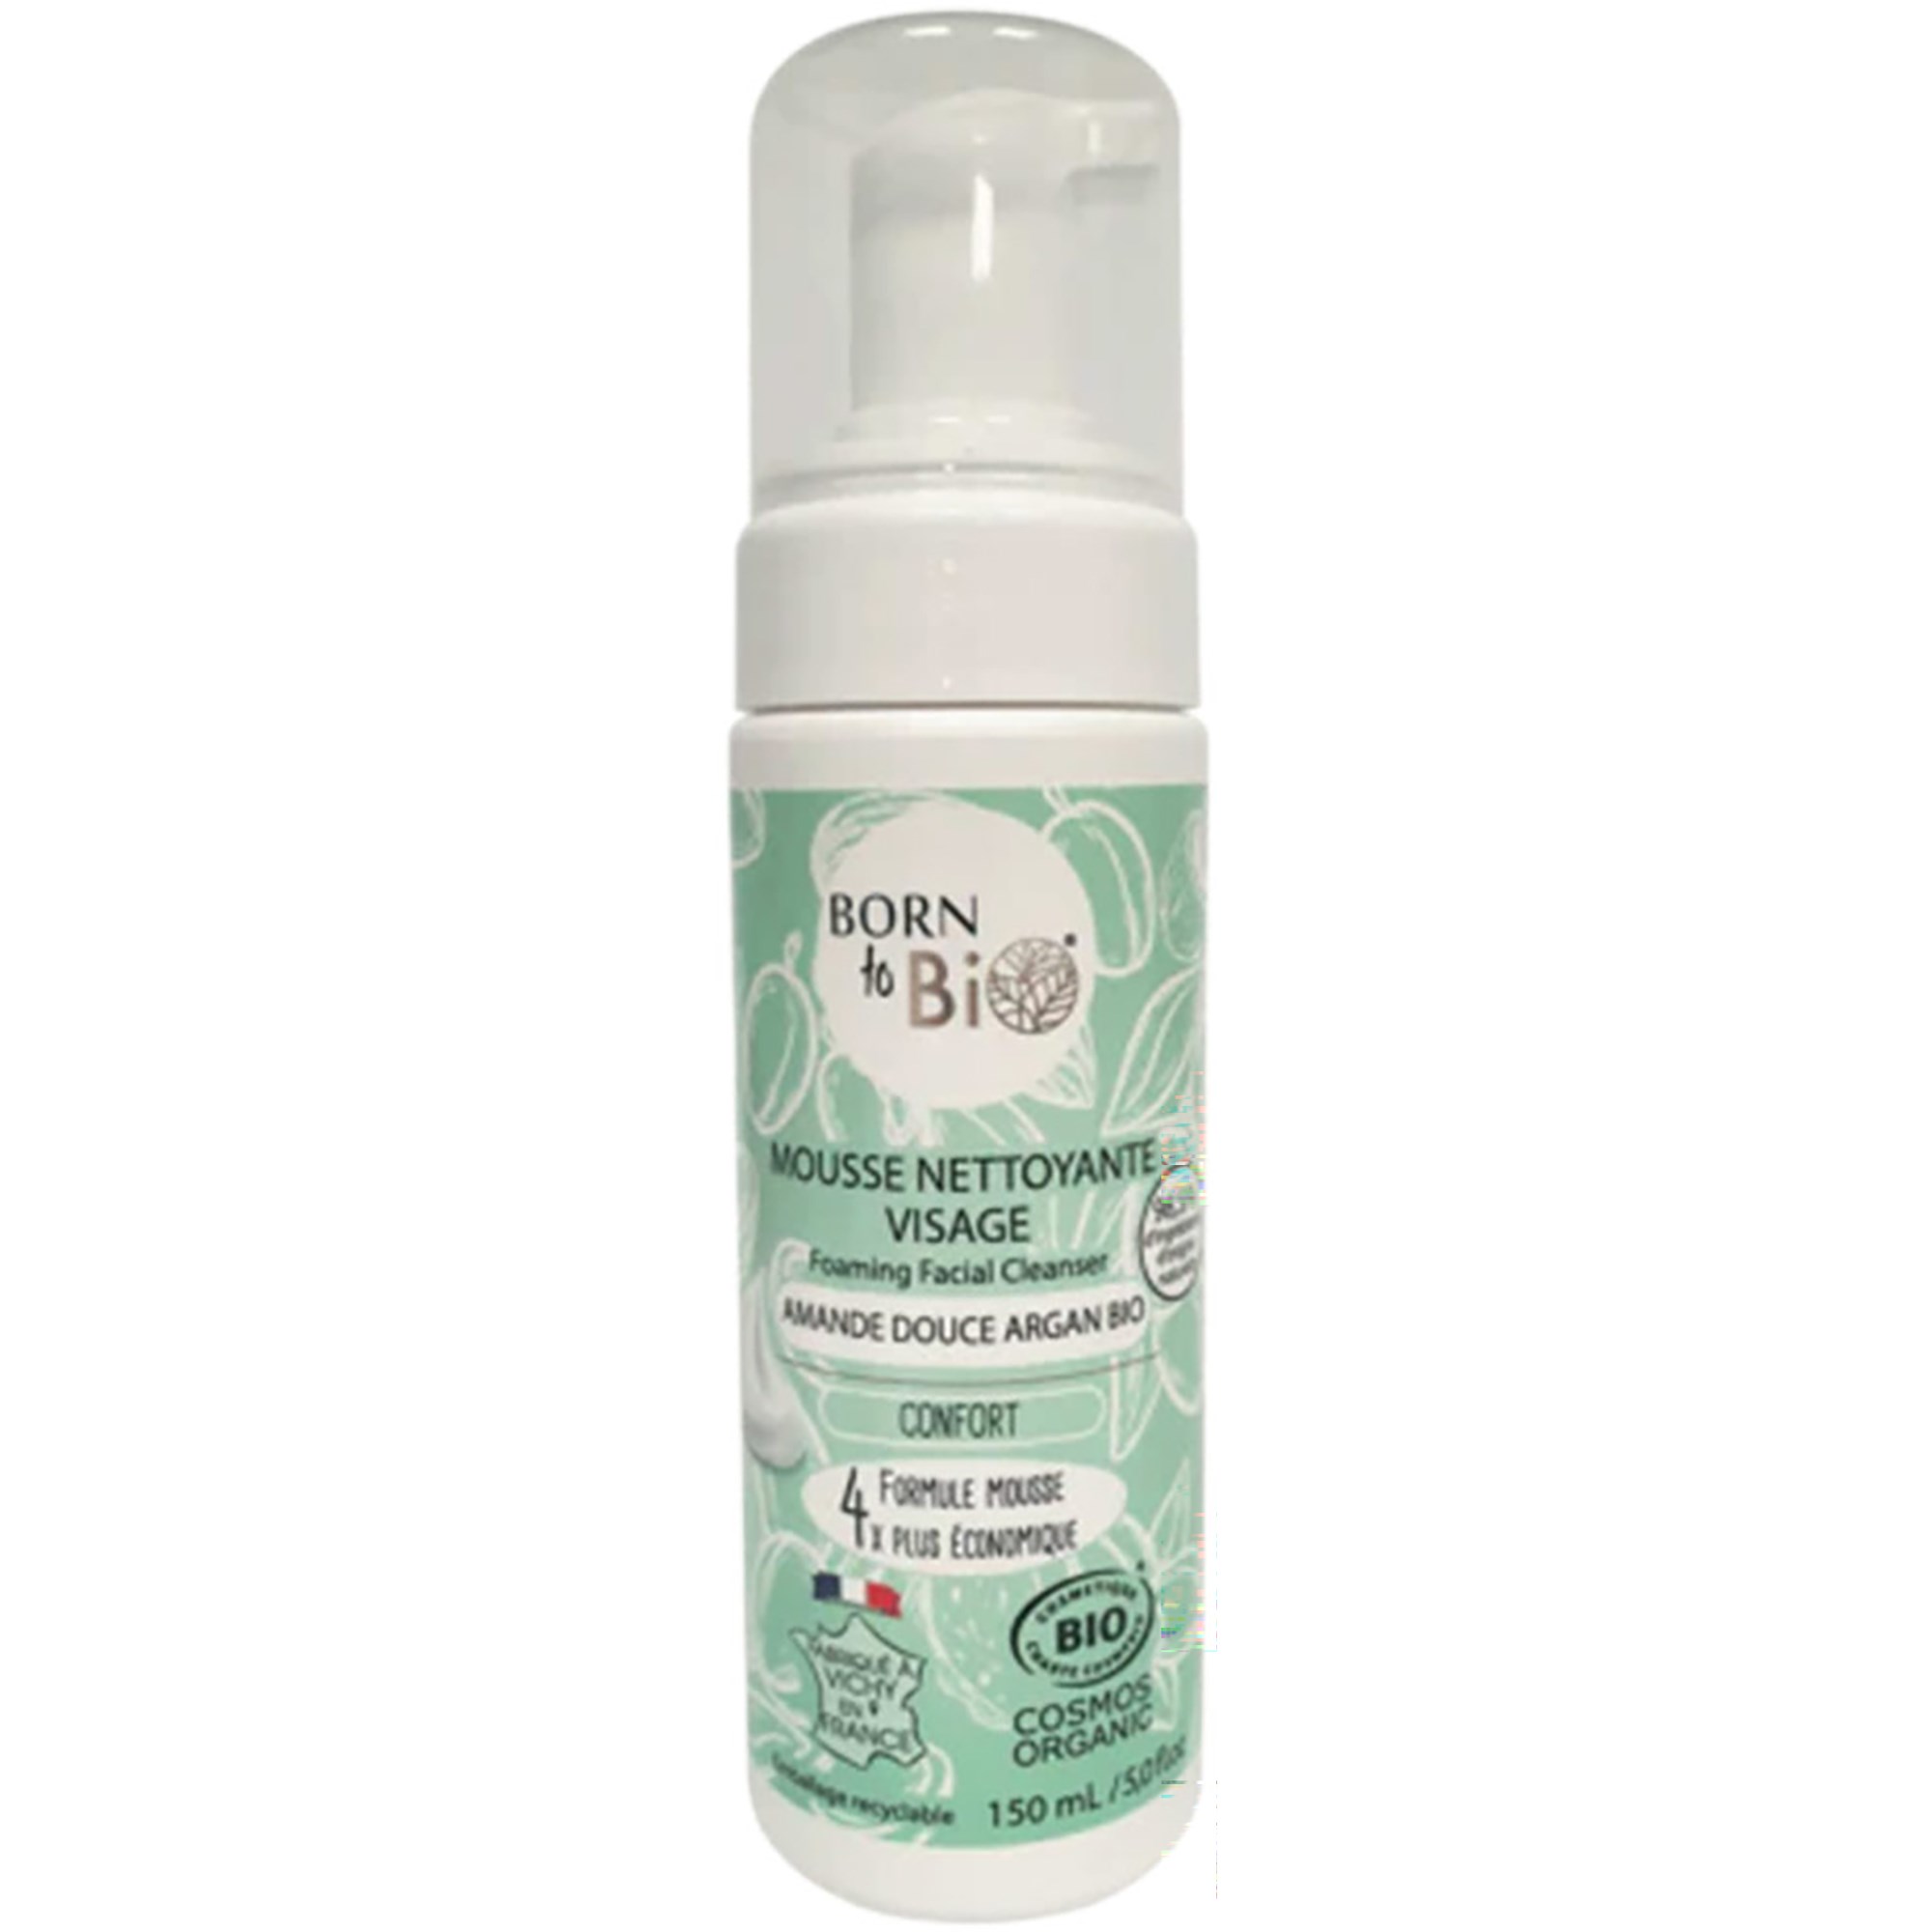 Born to Bio Cleansing Foam For Normal Skin 150 ml